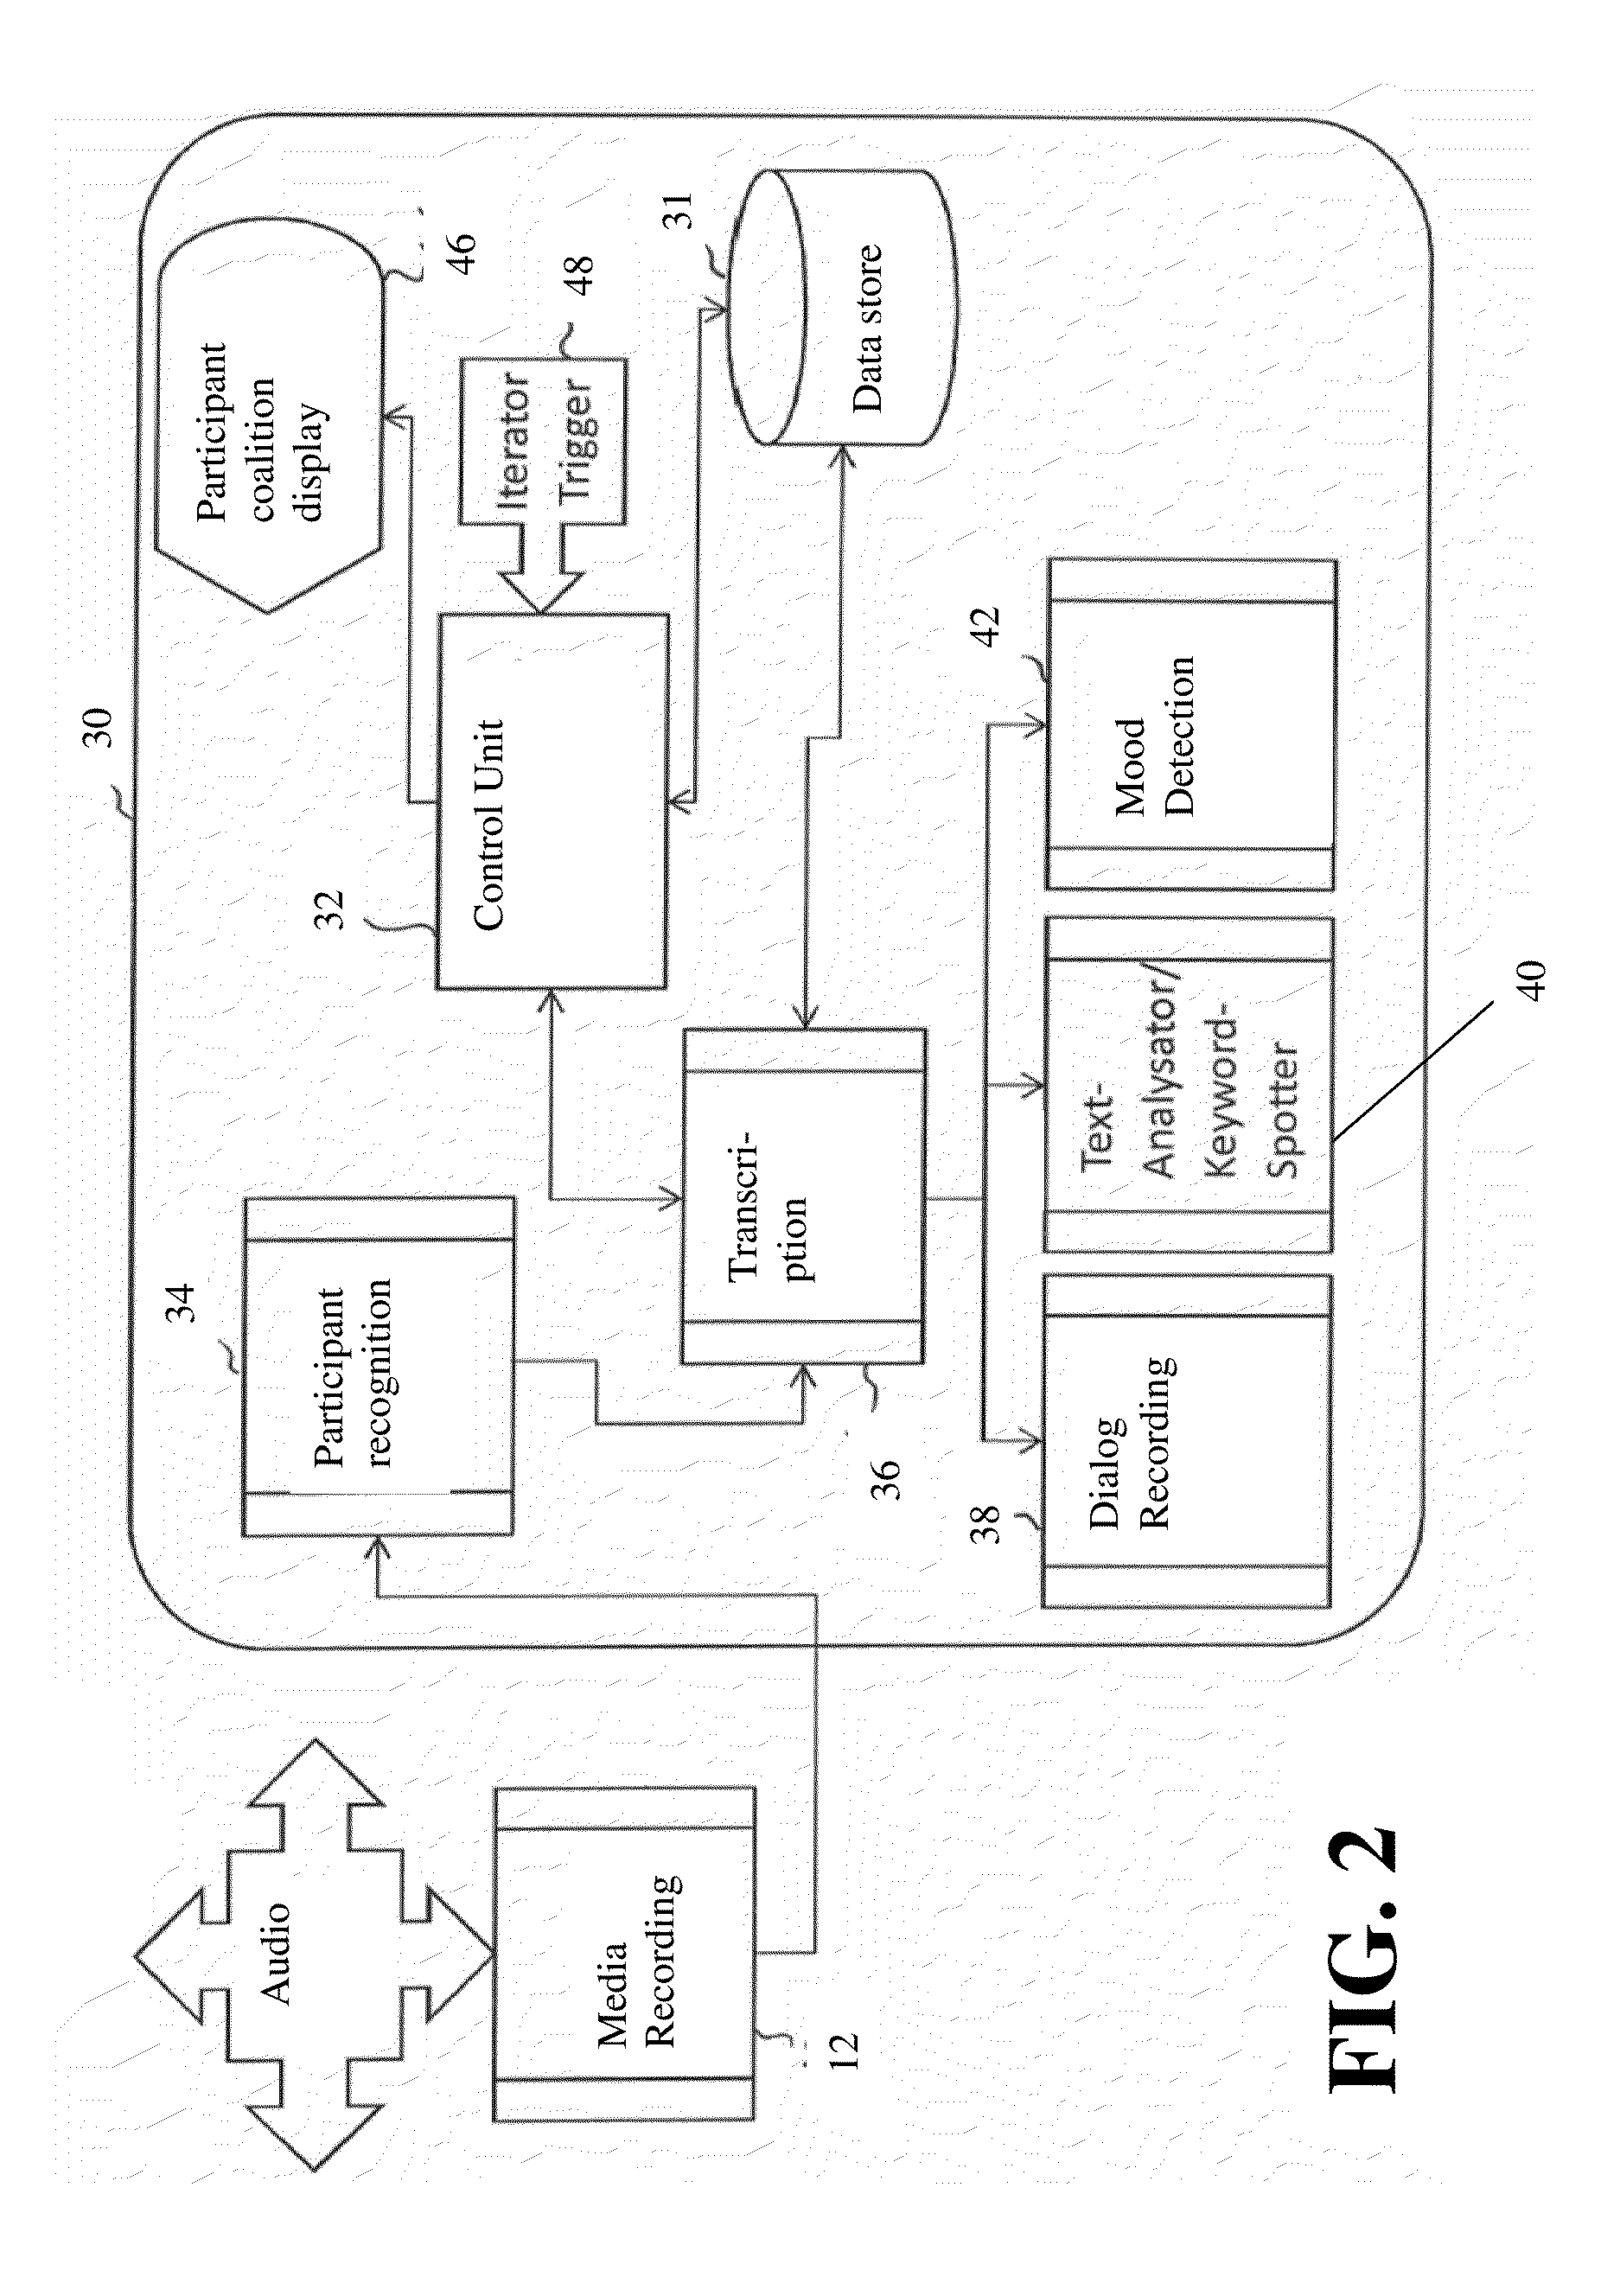 Conferencing system and method for controlling the conferencing system